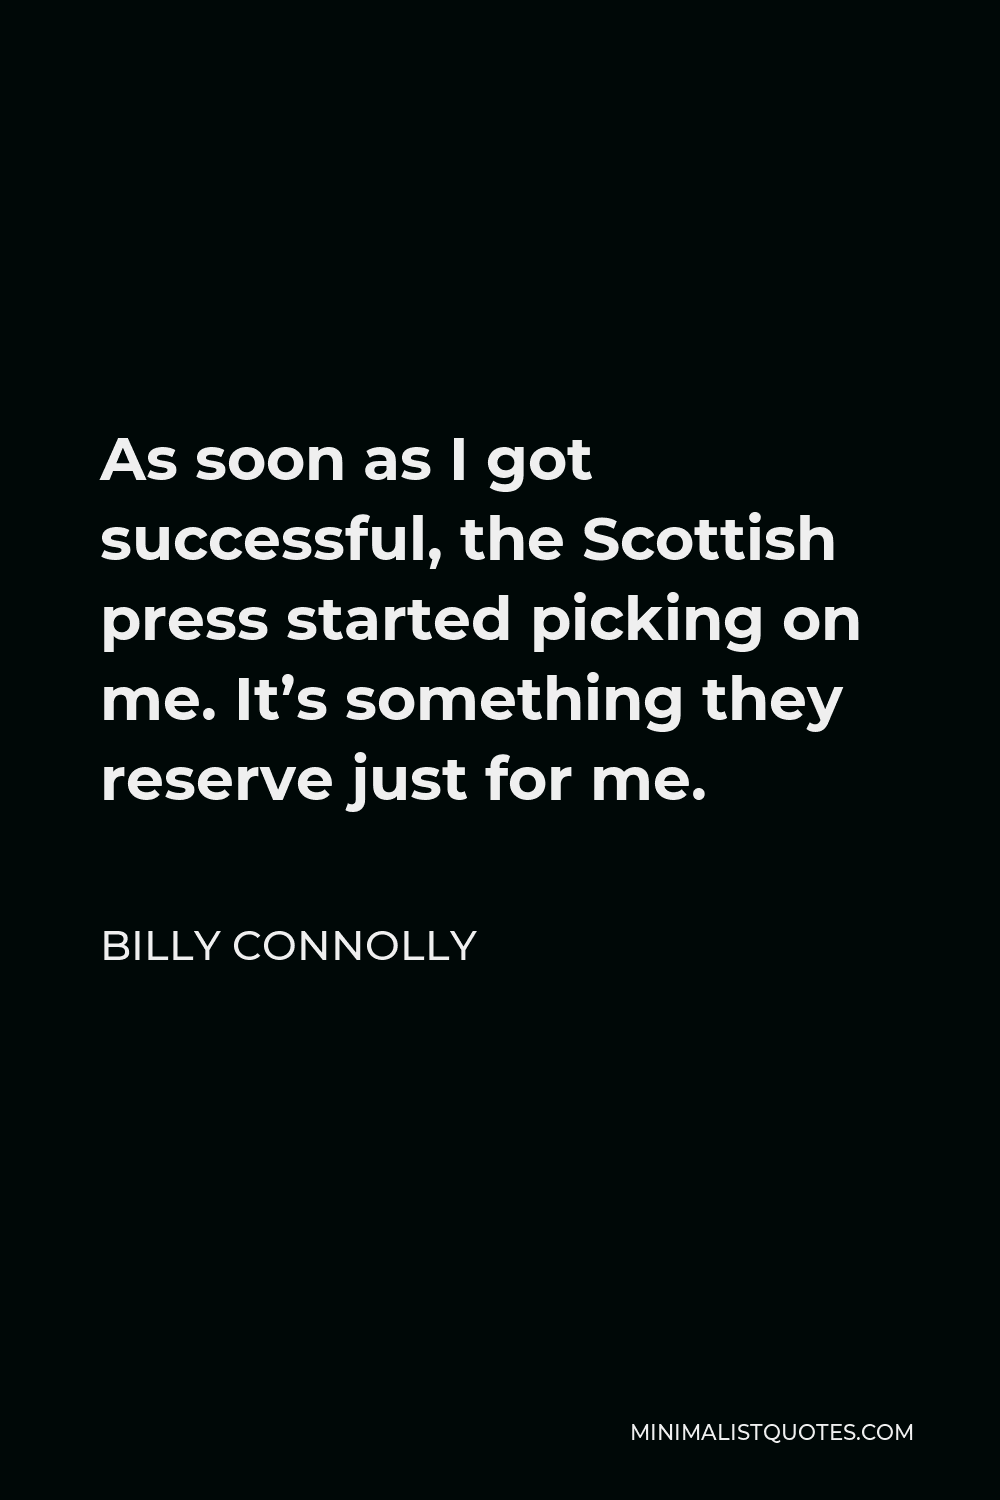 Billy Connolly Quote - As soon as I got successful, the Scottish press started picking on me. It’s something they reserve just for me.